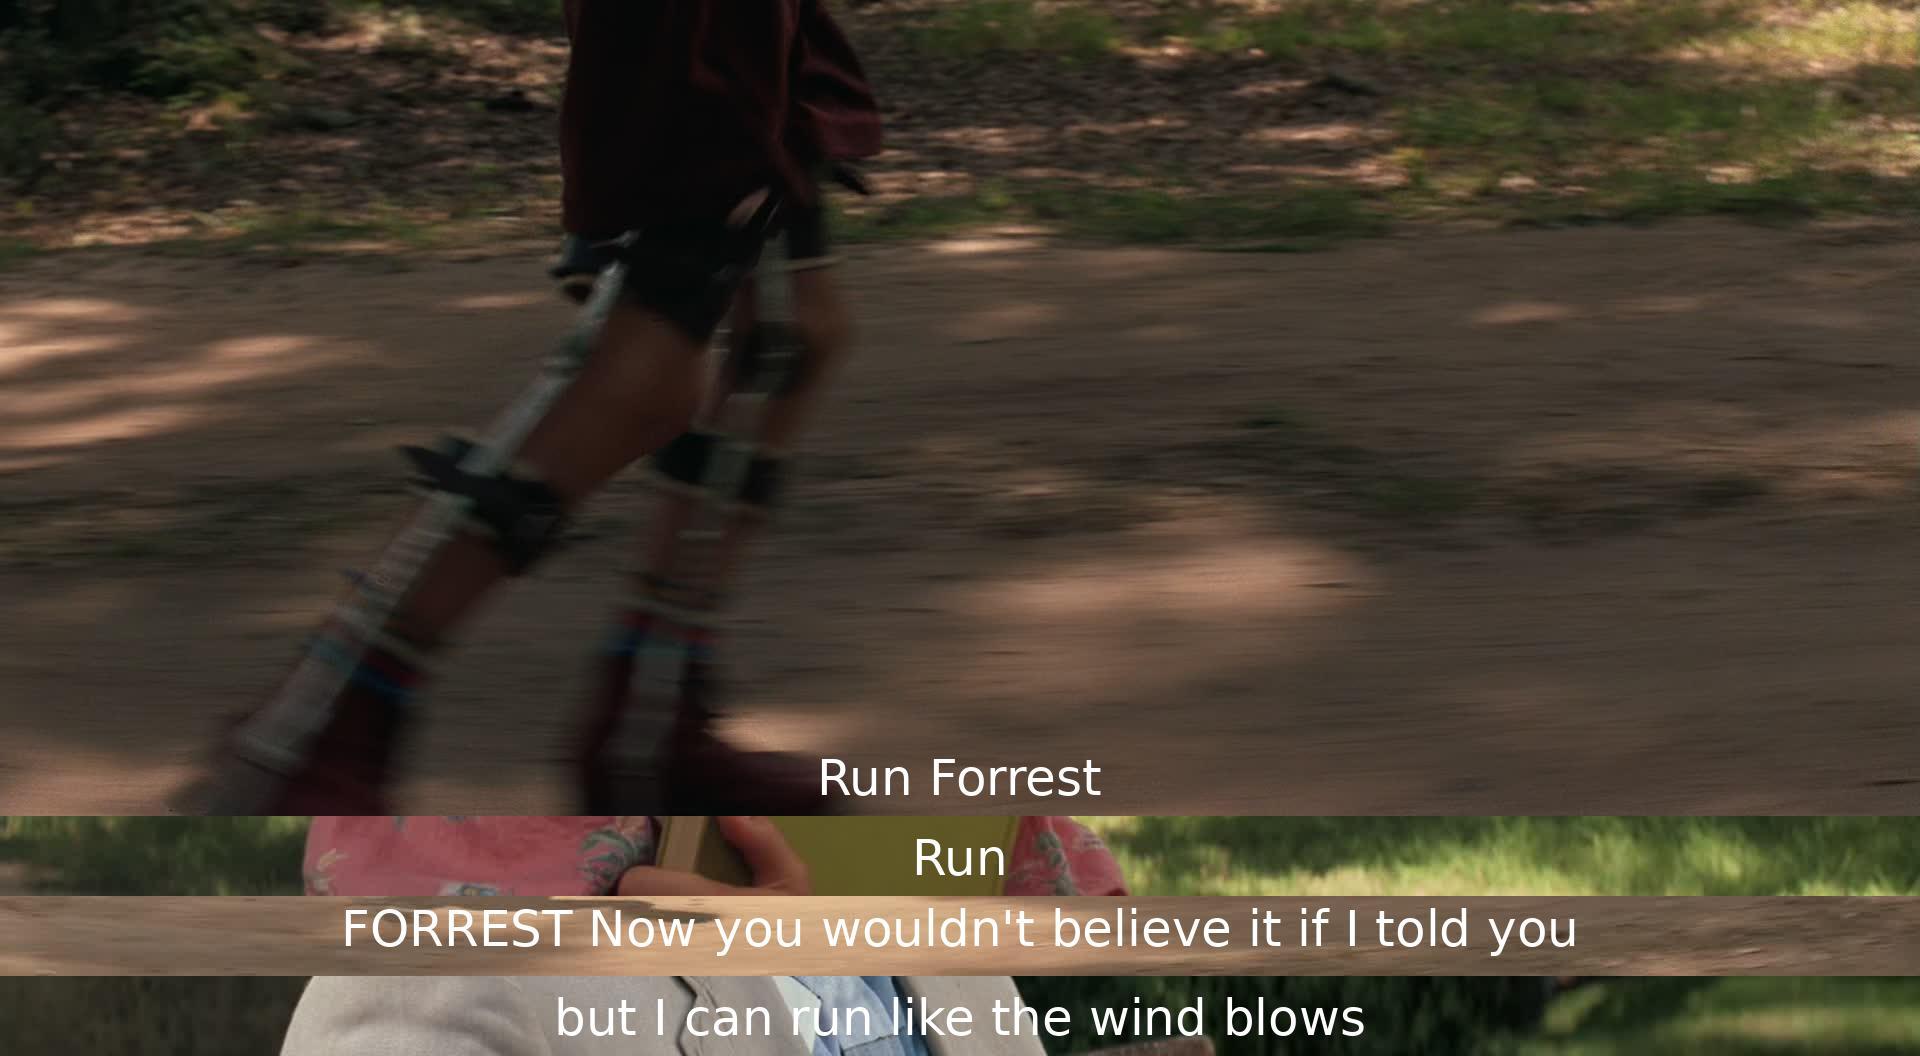 A person tells Forrest to run. Forrest responds by saying he can run fast.